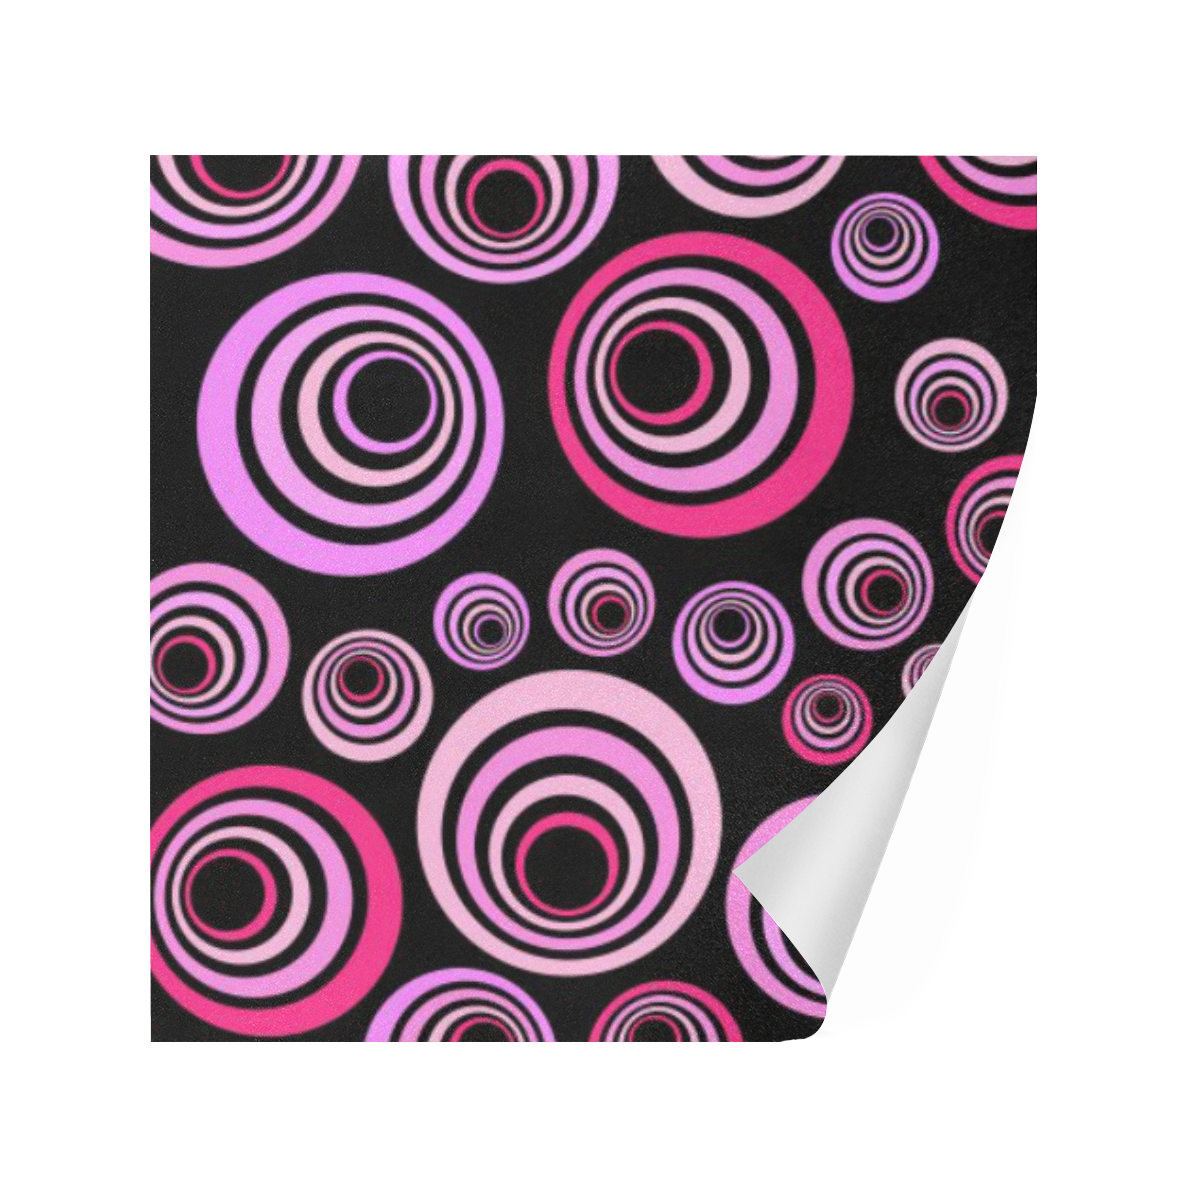 Retro Psychedelic Pretty Pink Pattern Gift Wrapping Paper 58"x 23" (5 Rolls)